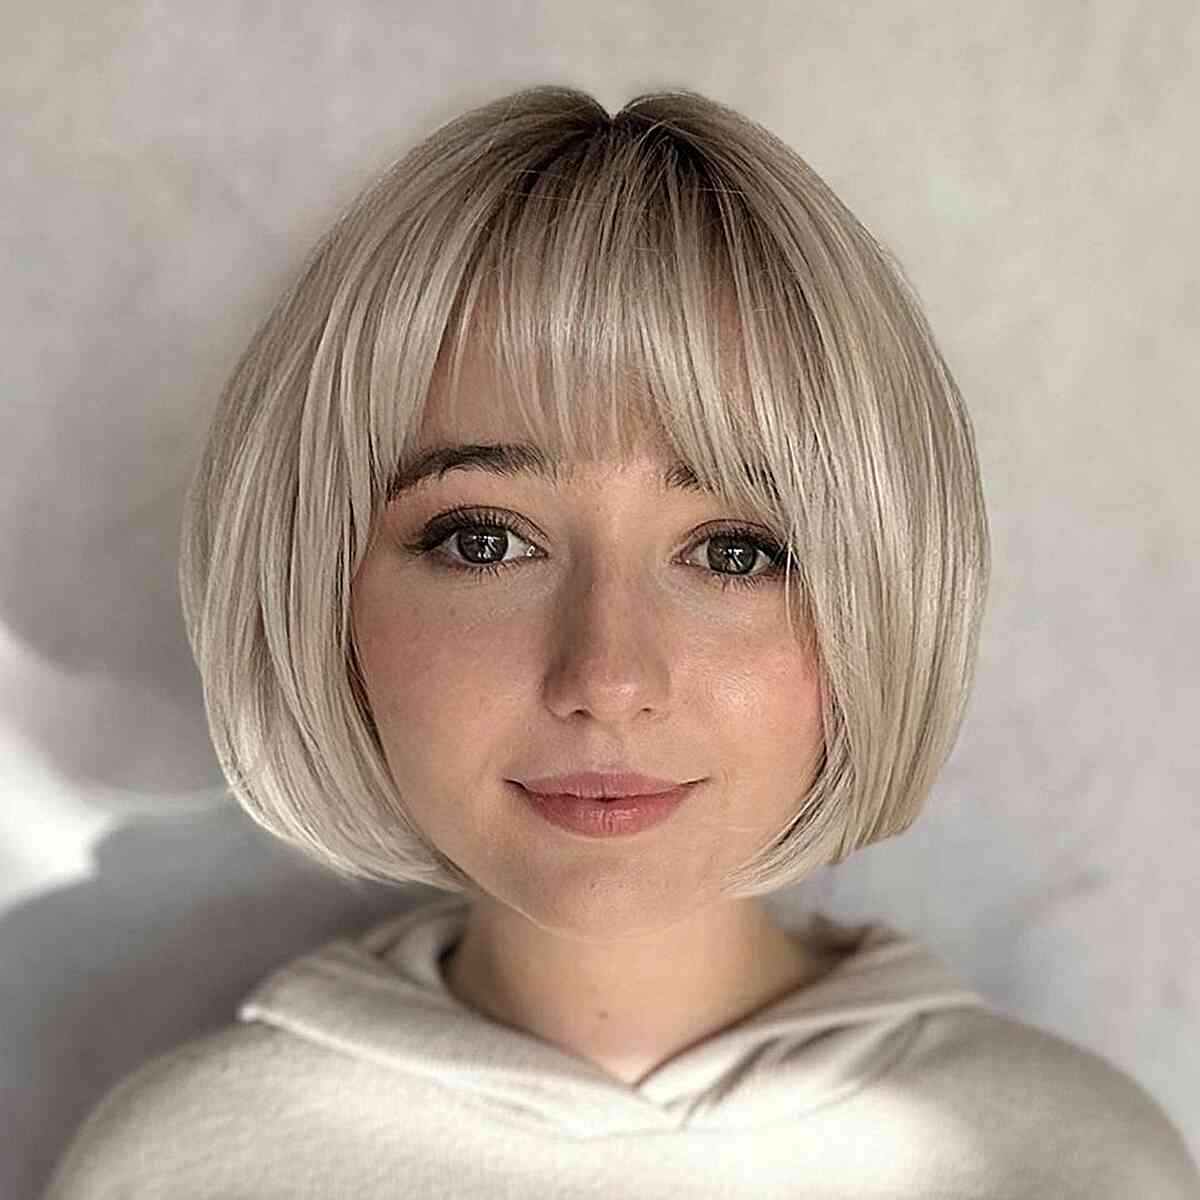 Short Blonde French Bob with Fringe for girls in their 20s with style